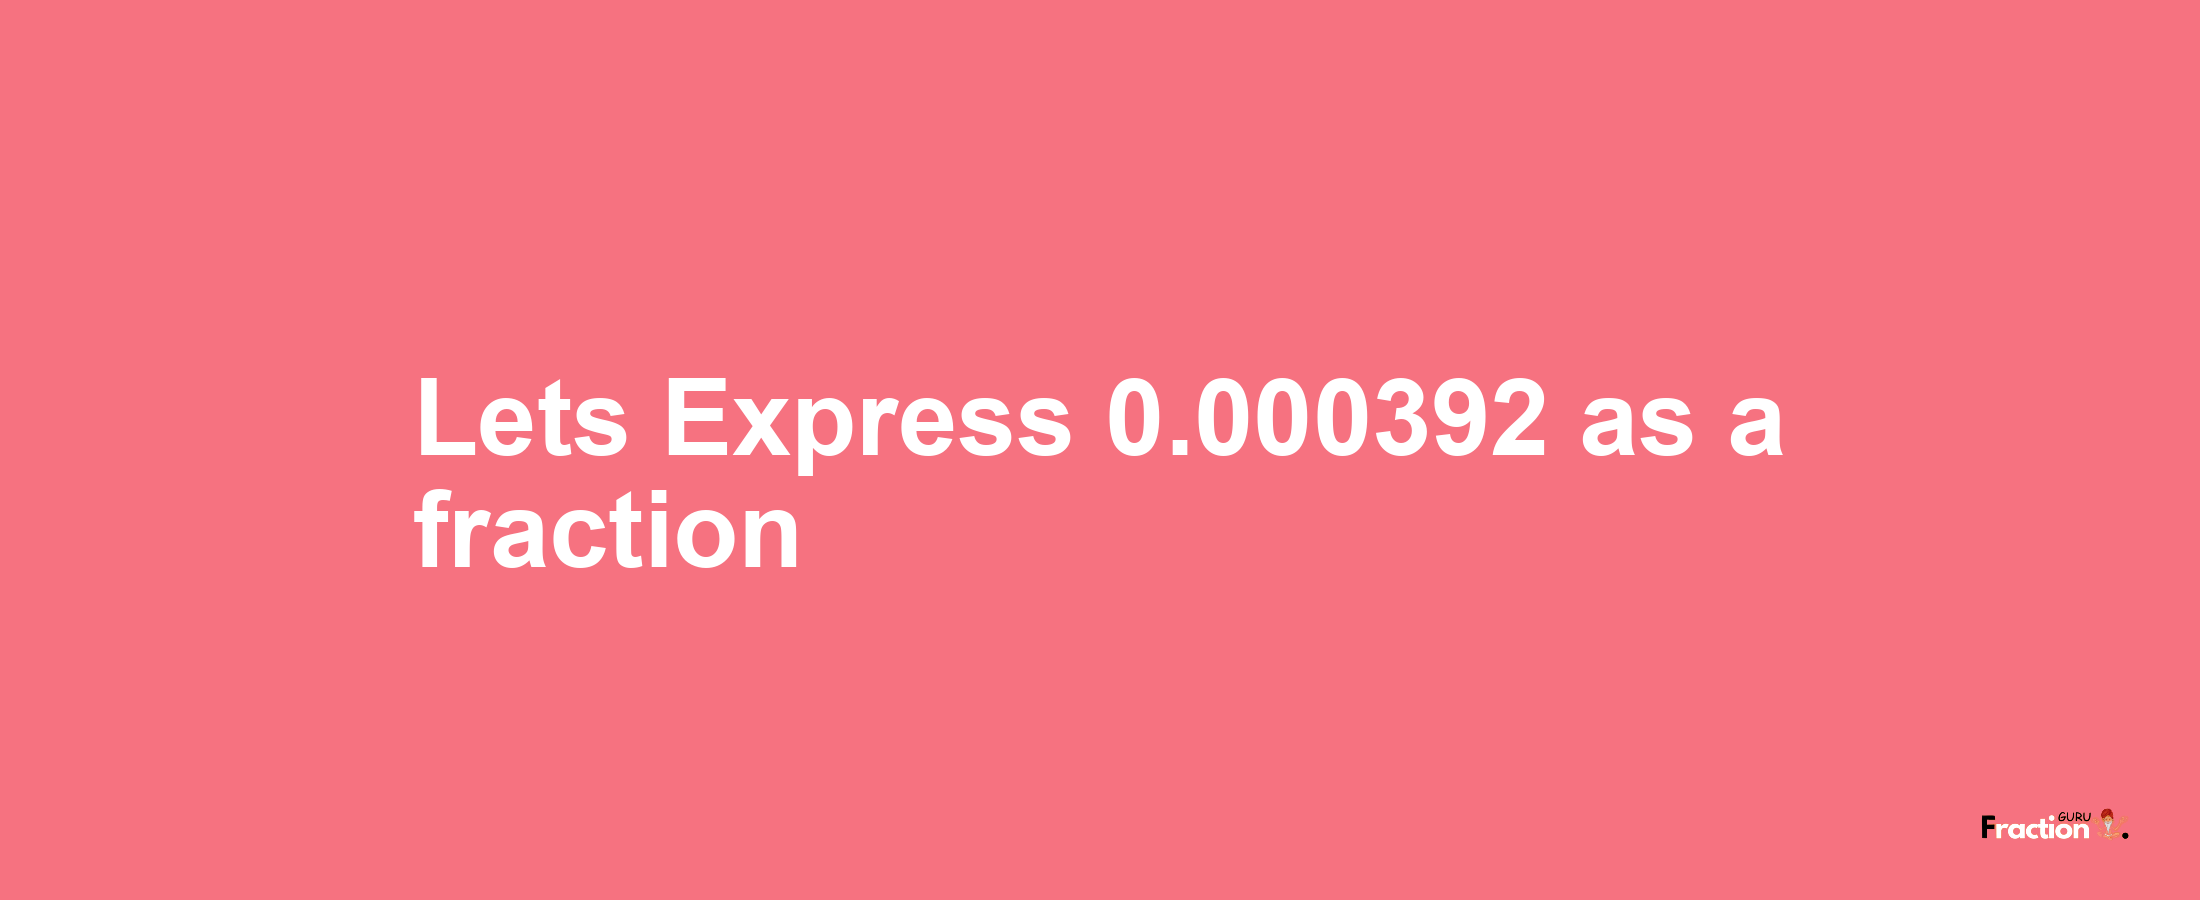 Lets Express 0.000392 as afraction